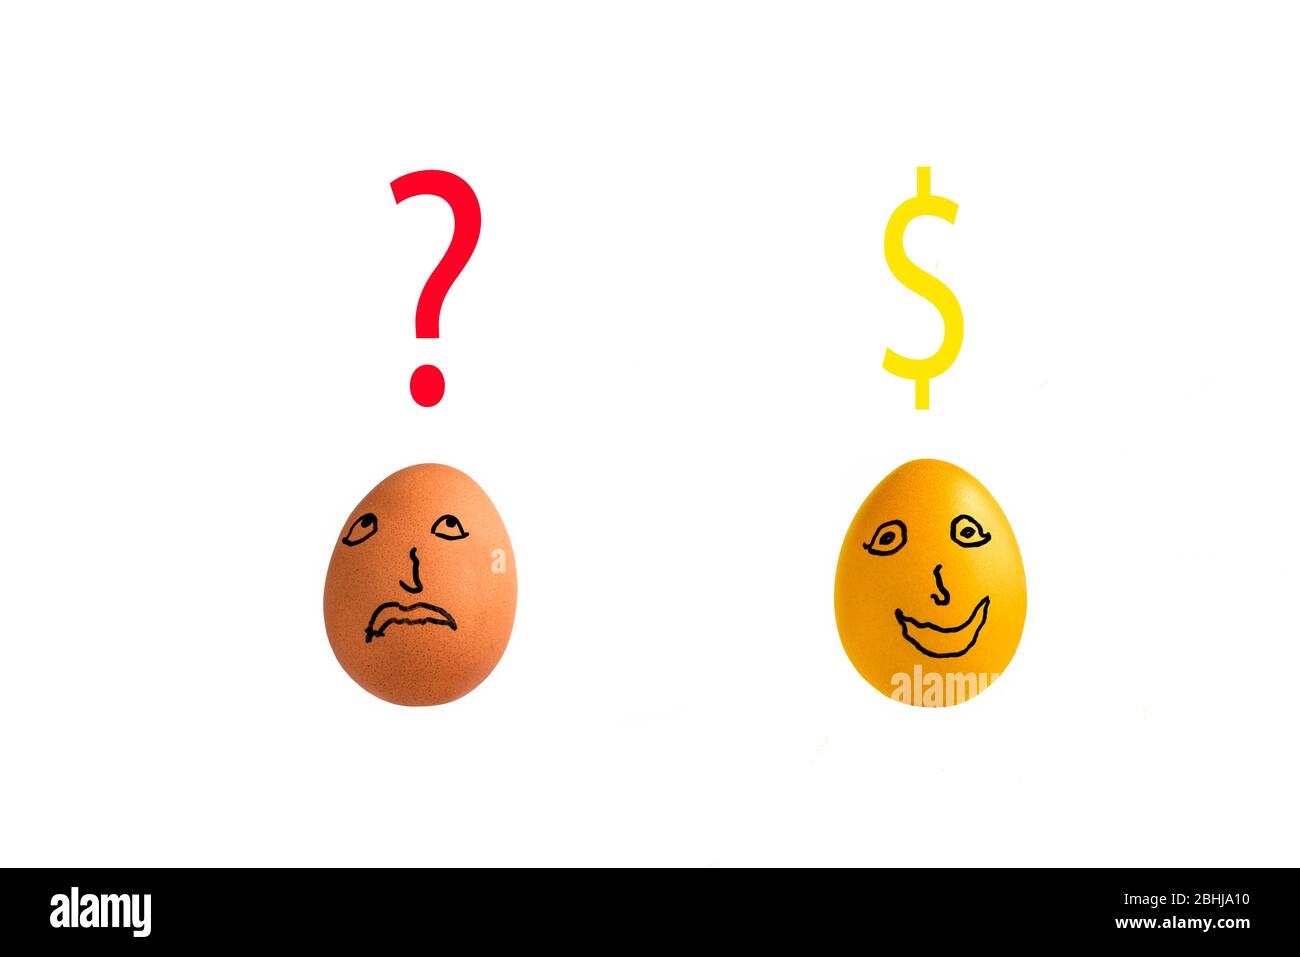 Two chicken eggs, one golden against a white background with question mark and pound/dollar signs. Concept: Revelation, inspiration, epiphany, genius. Stock Photo